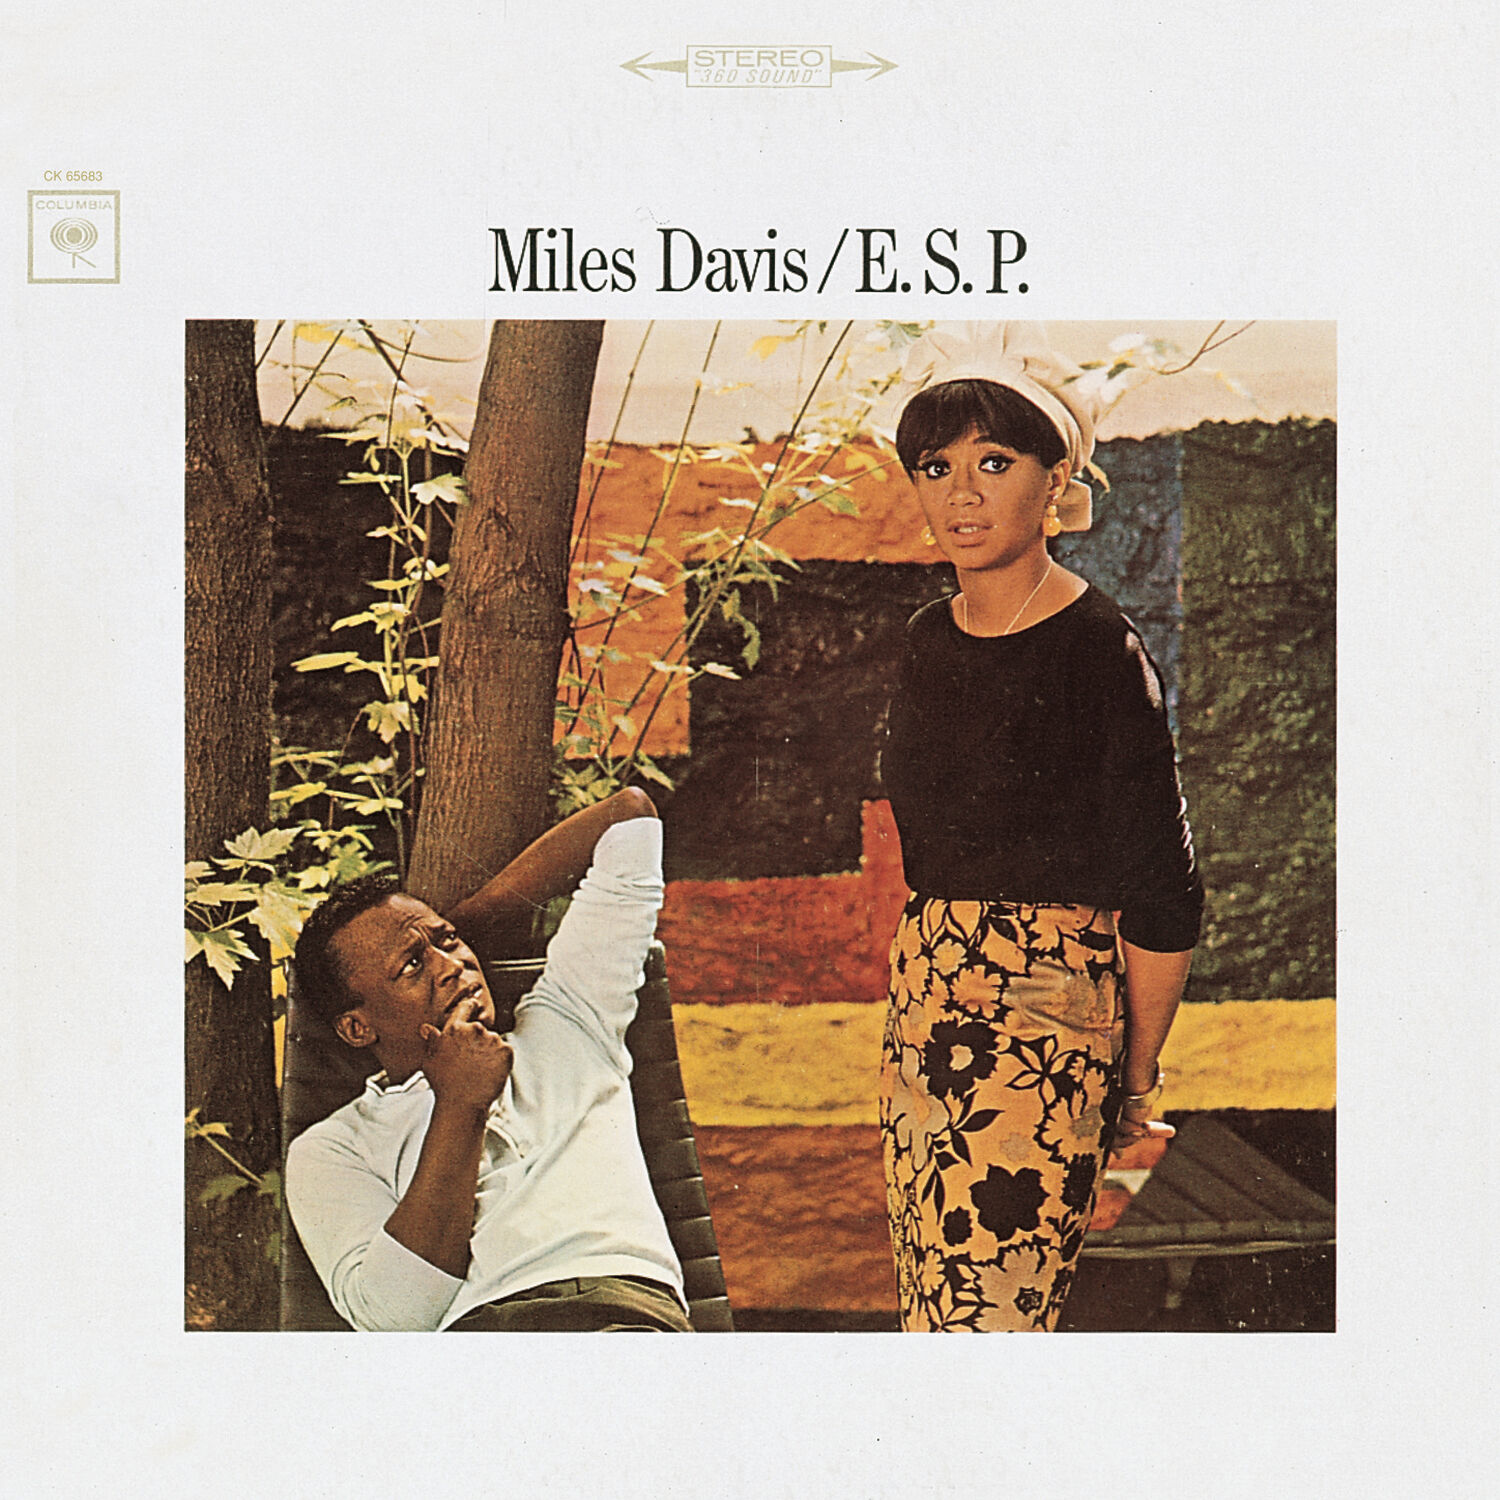 An album cover for Miles Davis' album E.S.P. Miles Davis is laying on a sunchair against a Fall background looking up at his wife in a white hankerchief, black top, and black and yellow skirt with flowers.